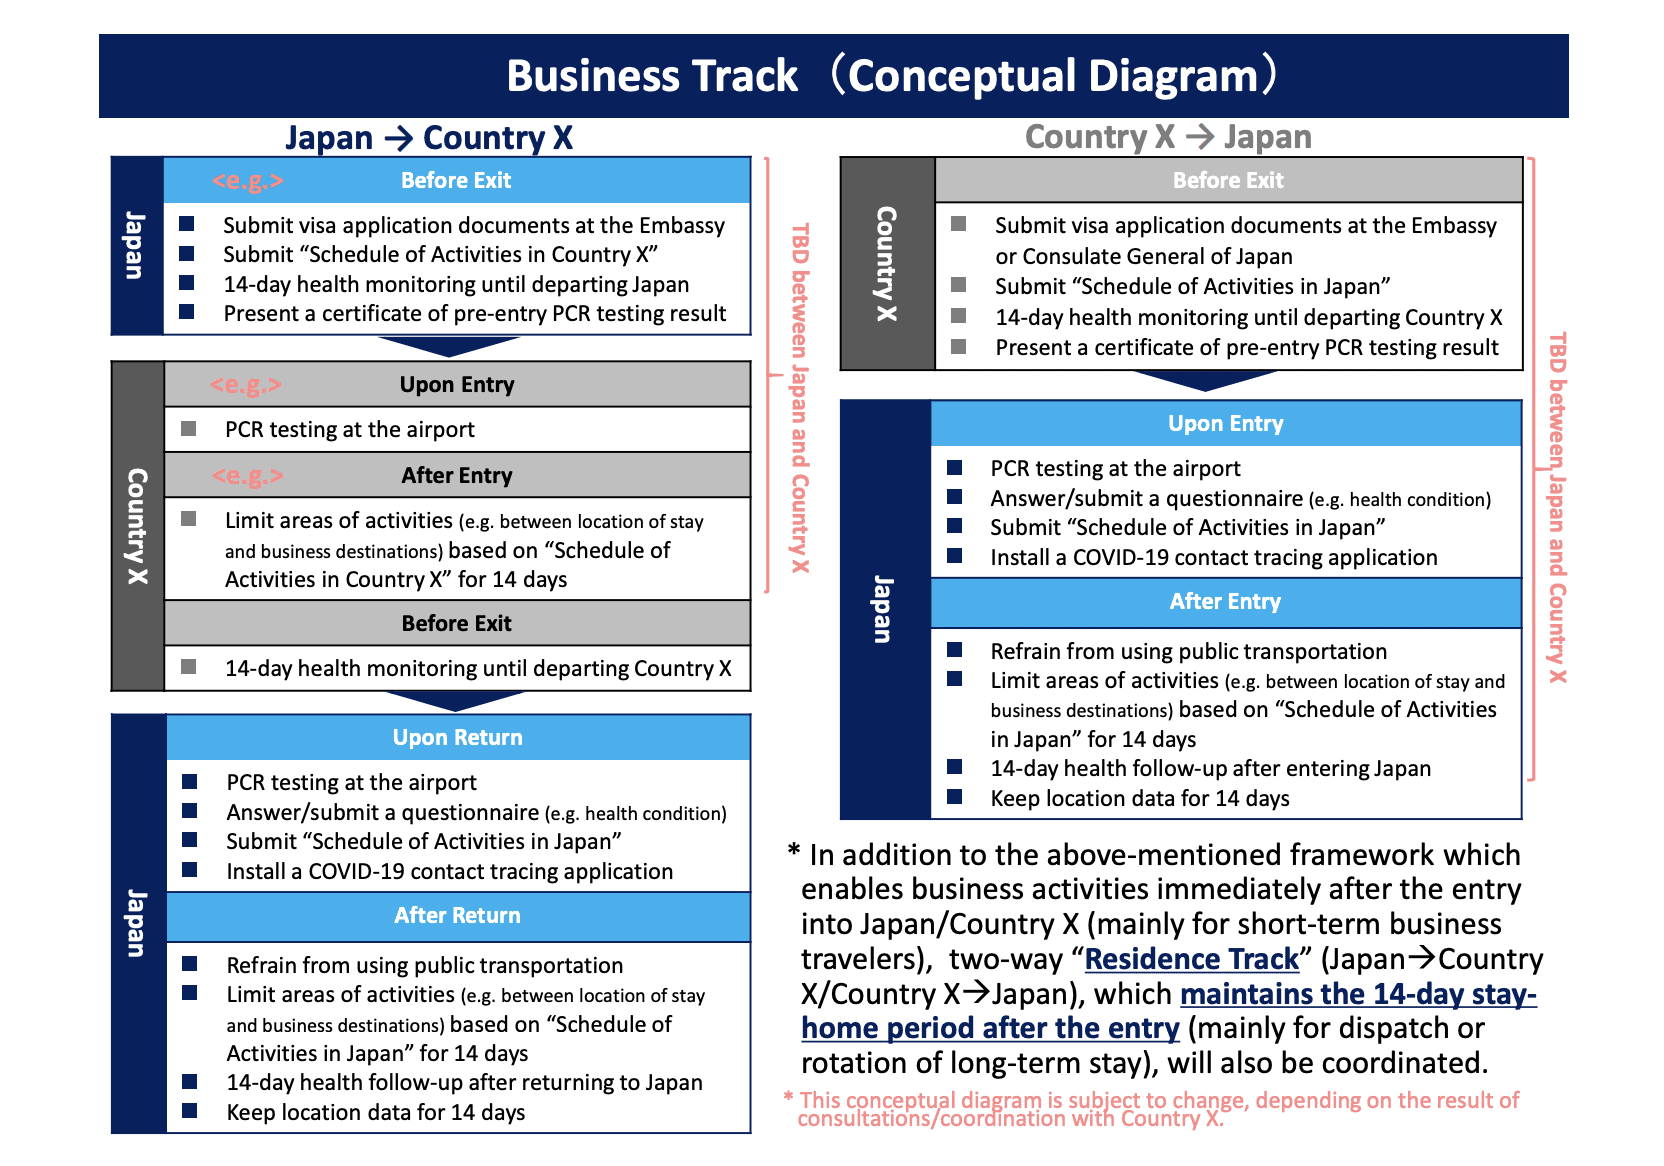 Business Track for entering and re-entering Japan